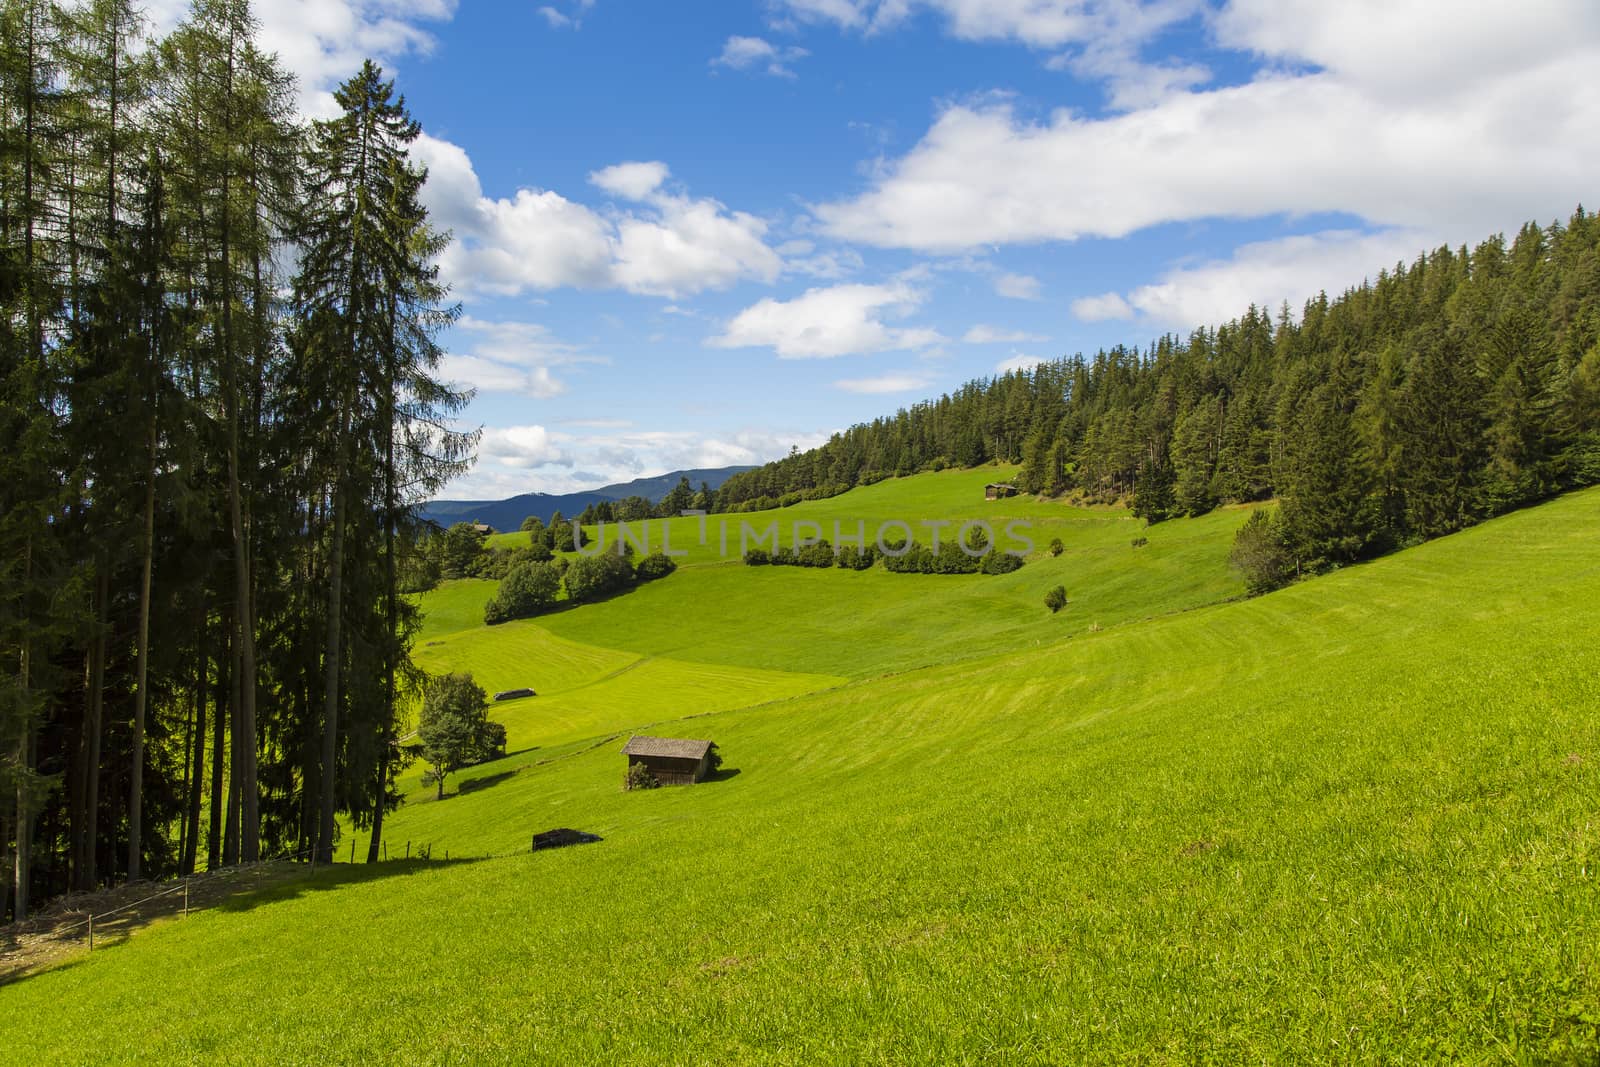 View a portion of the valley in Seiser Alm with green fields and blue sky